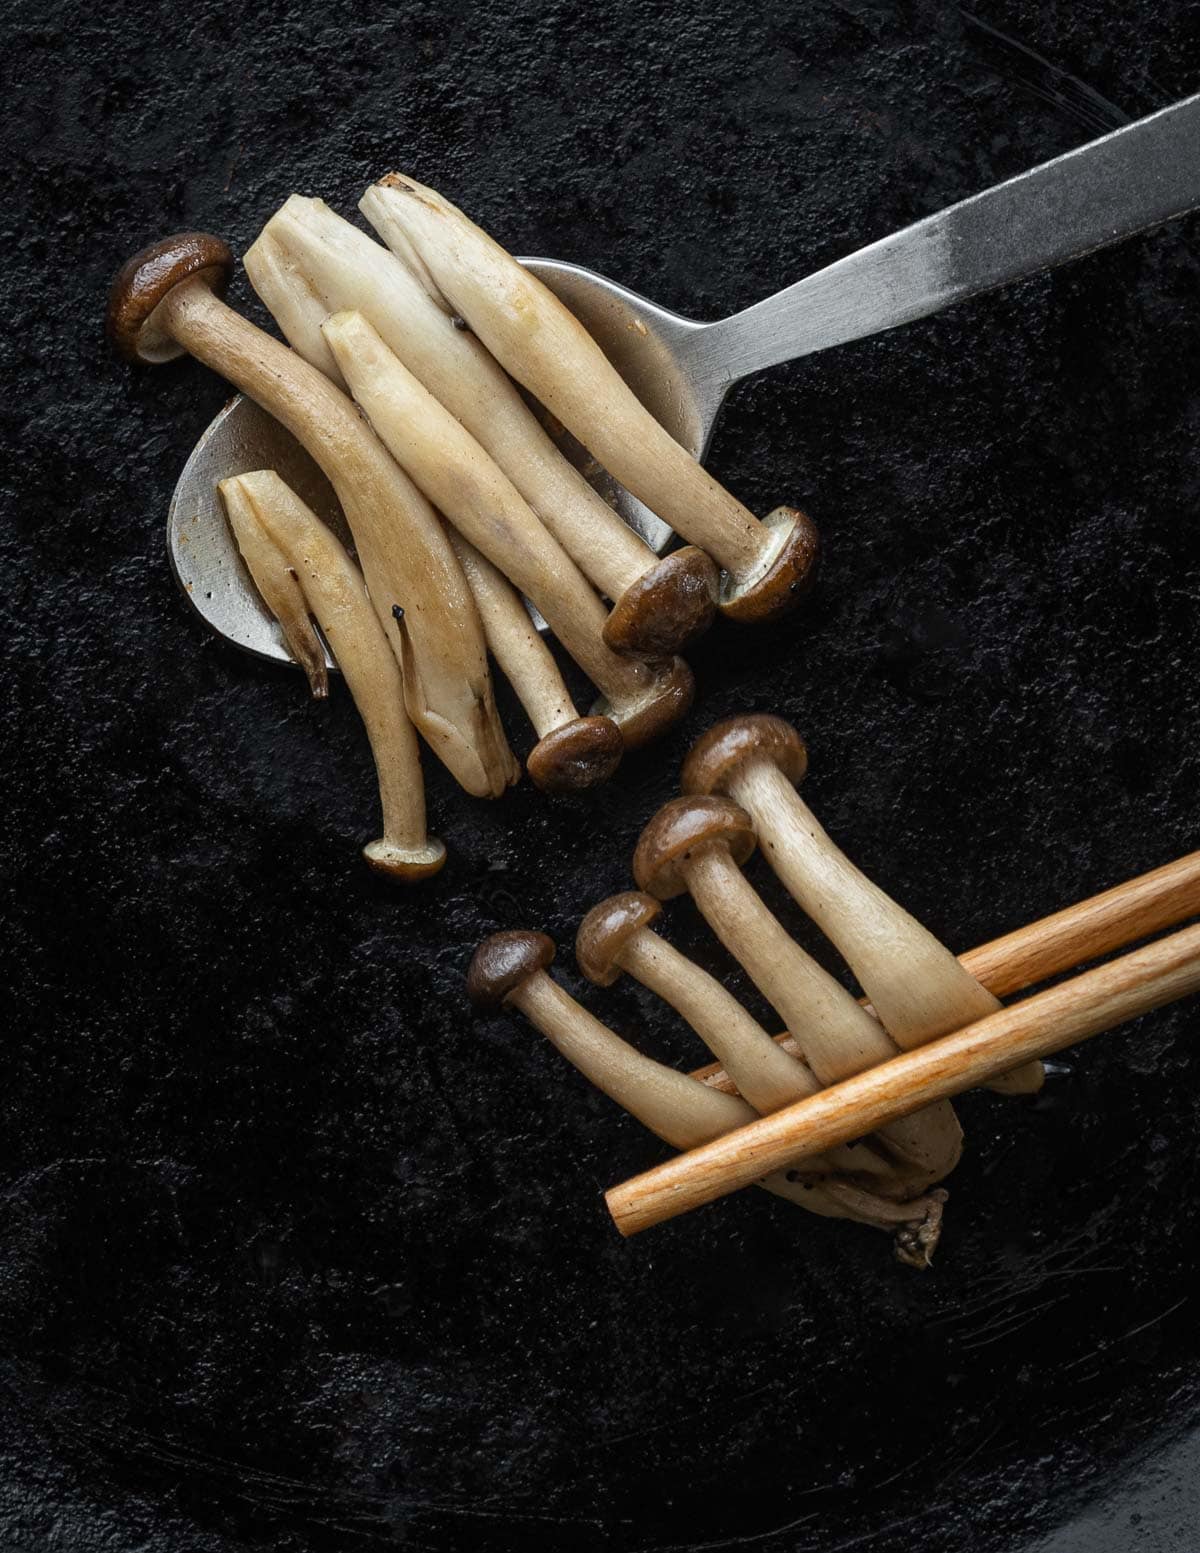 Cooked beech mushrooms falling off of a spoon on a black background, shown next to mushrooms neatly held by chopsticks to illustrate traditional cooking methods. 